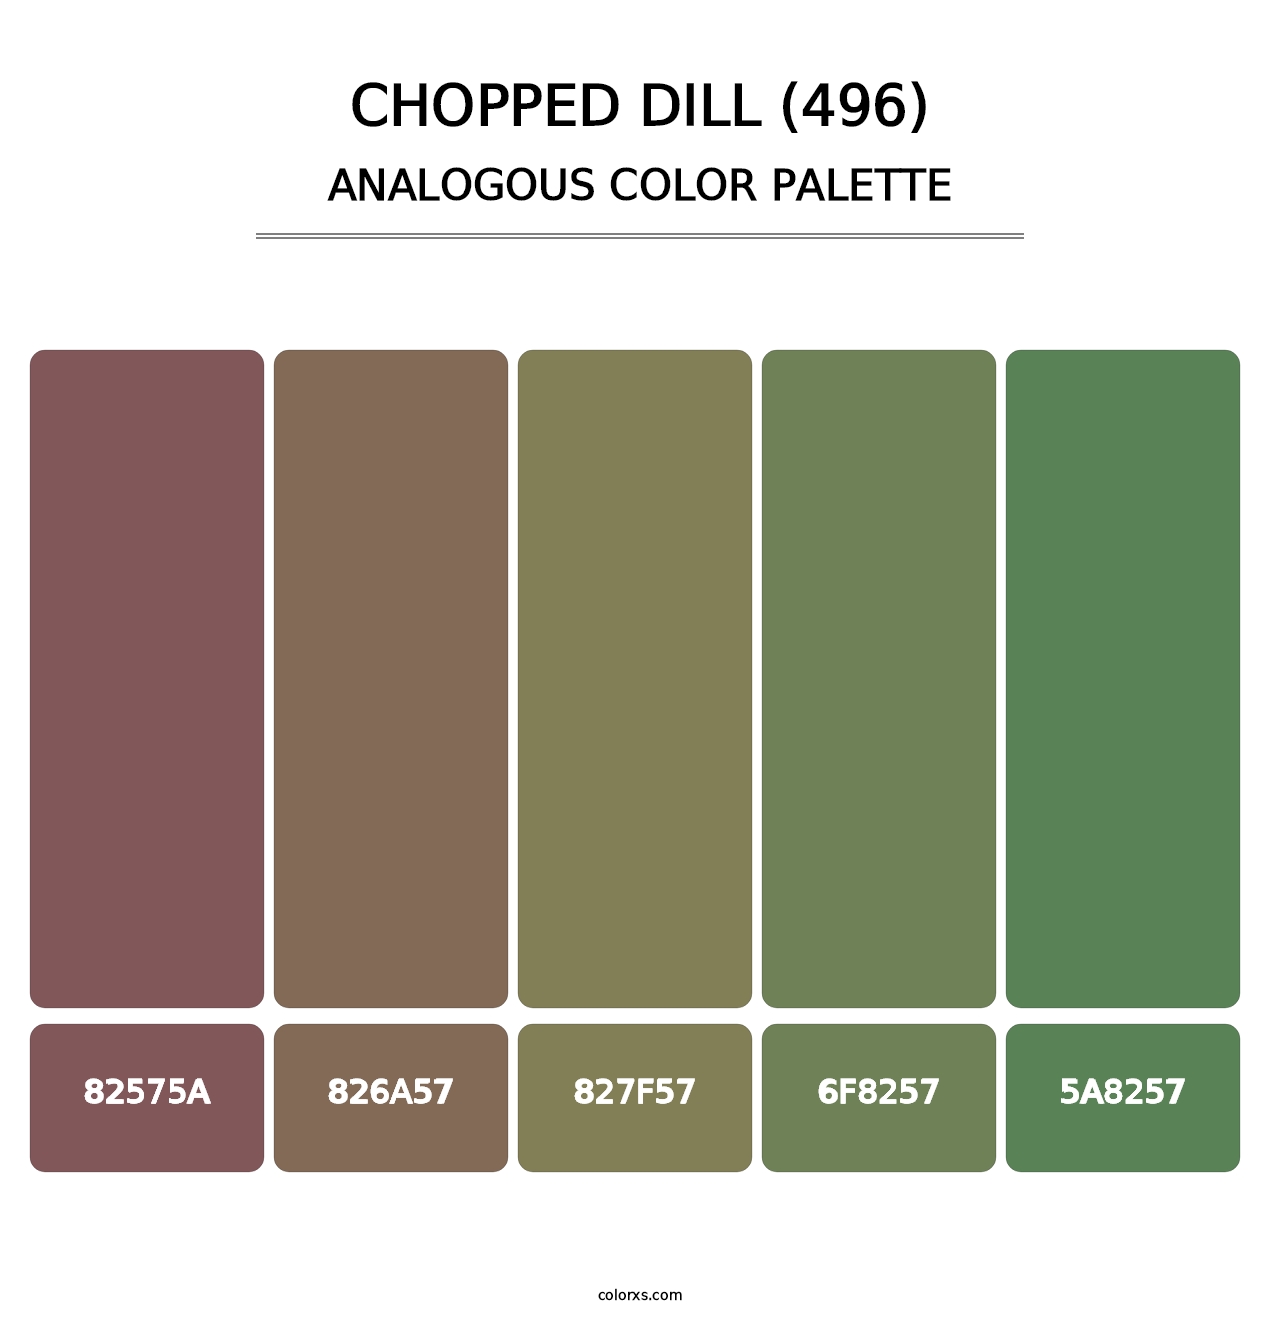 Chopped Dill (496) - Analogous Color Palette